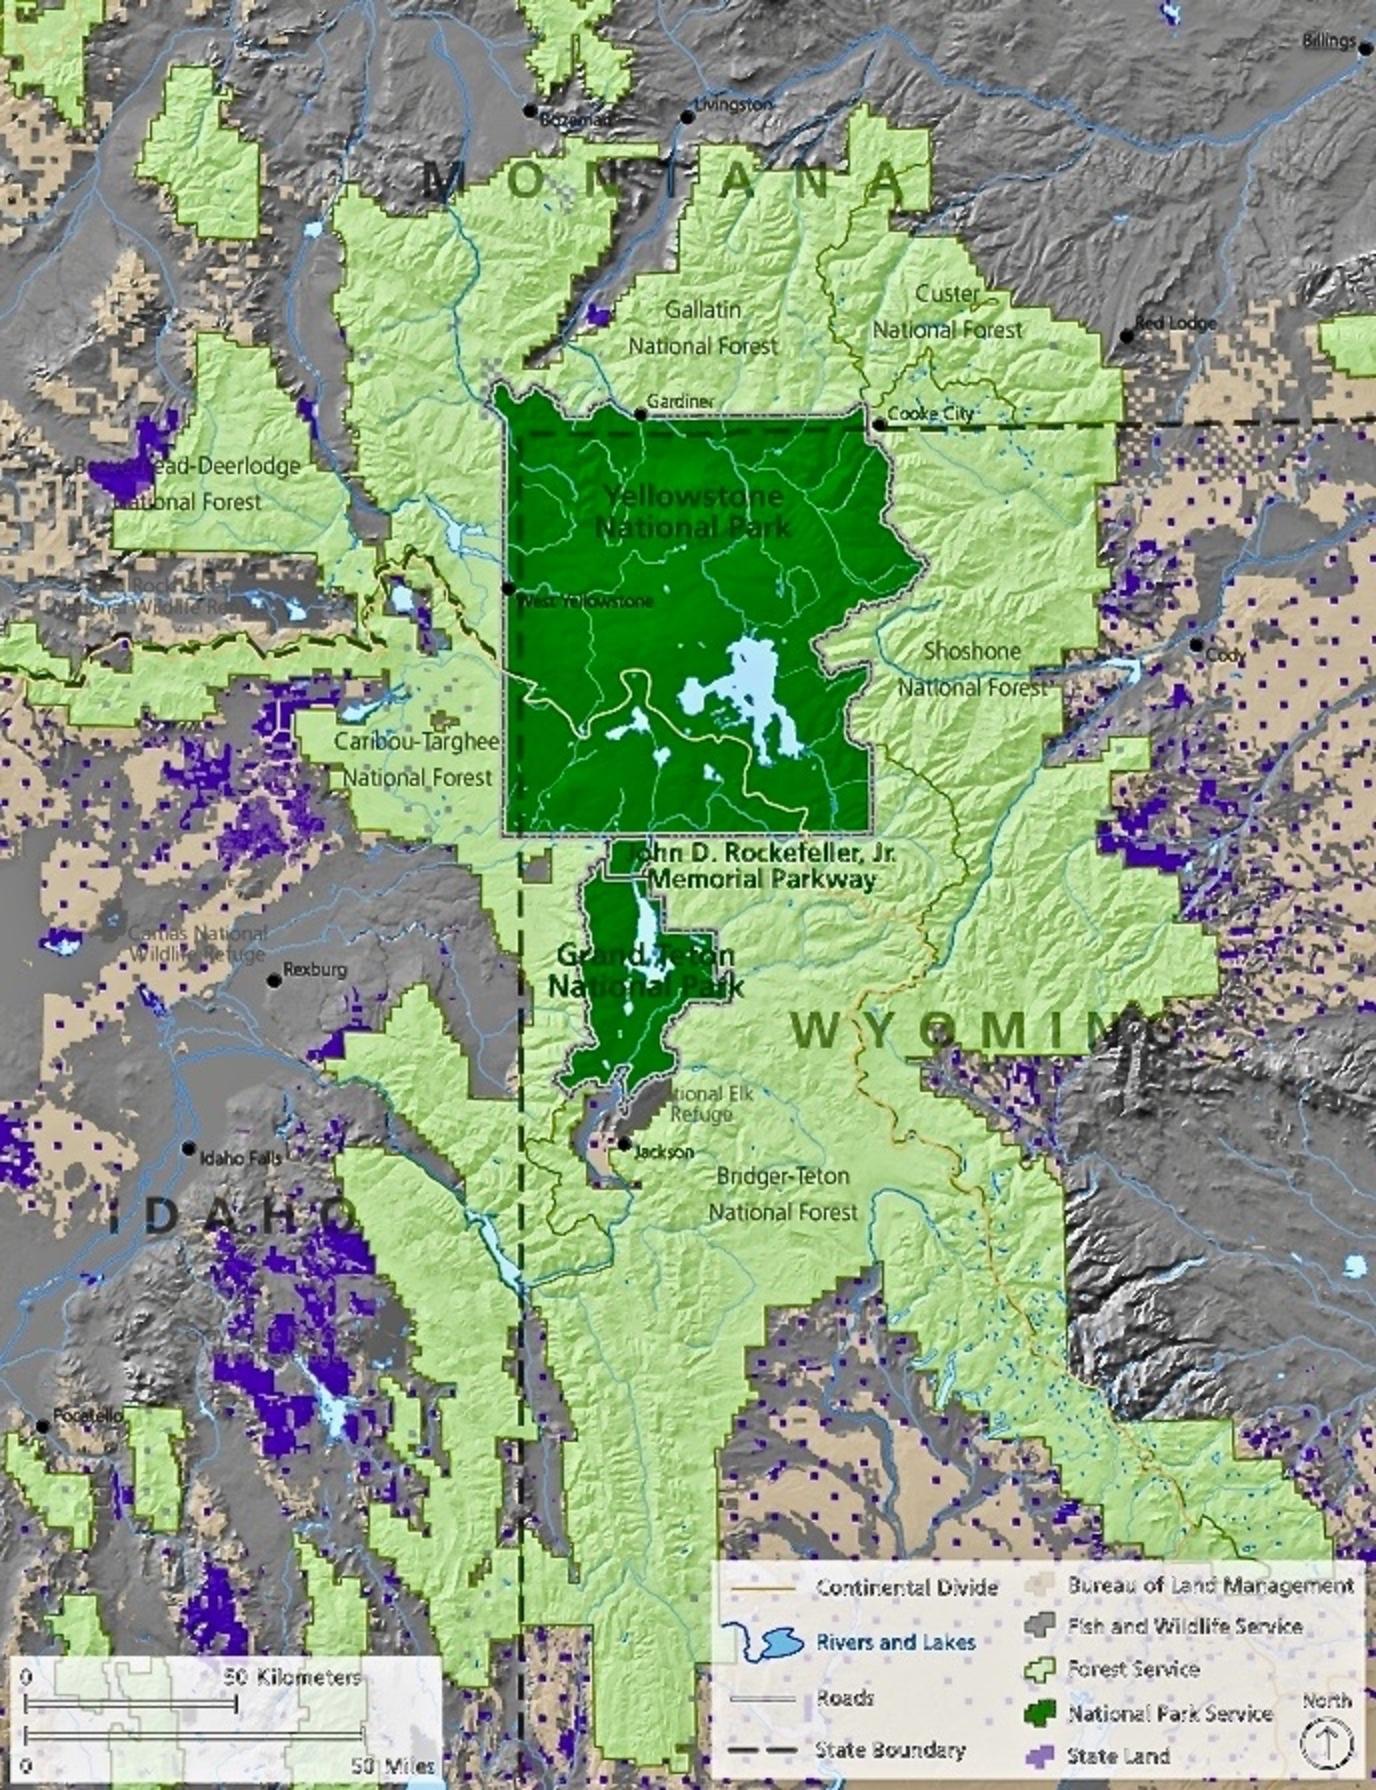 The Greater Yellowstone Ecosystem is one of the most ecologically-intact bioregions in the temperature zones of the world.  At more than 22 million acres, most of its size is comprised of federal public lands (owned by all U.S. citizens) yet four or five million acres of private land are crucial to the survival of wildlife, clean rivers, open space, and rural culture.   Everywhere else in the Lower 48, human population pressure, land converted to development,  and fragmented ownership has resulted in the "wild" characteristics found in Greater Yellowstone being lost.  Map courtesy National Park Service.